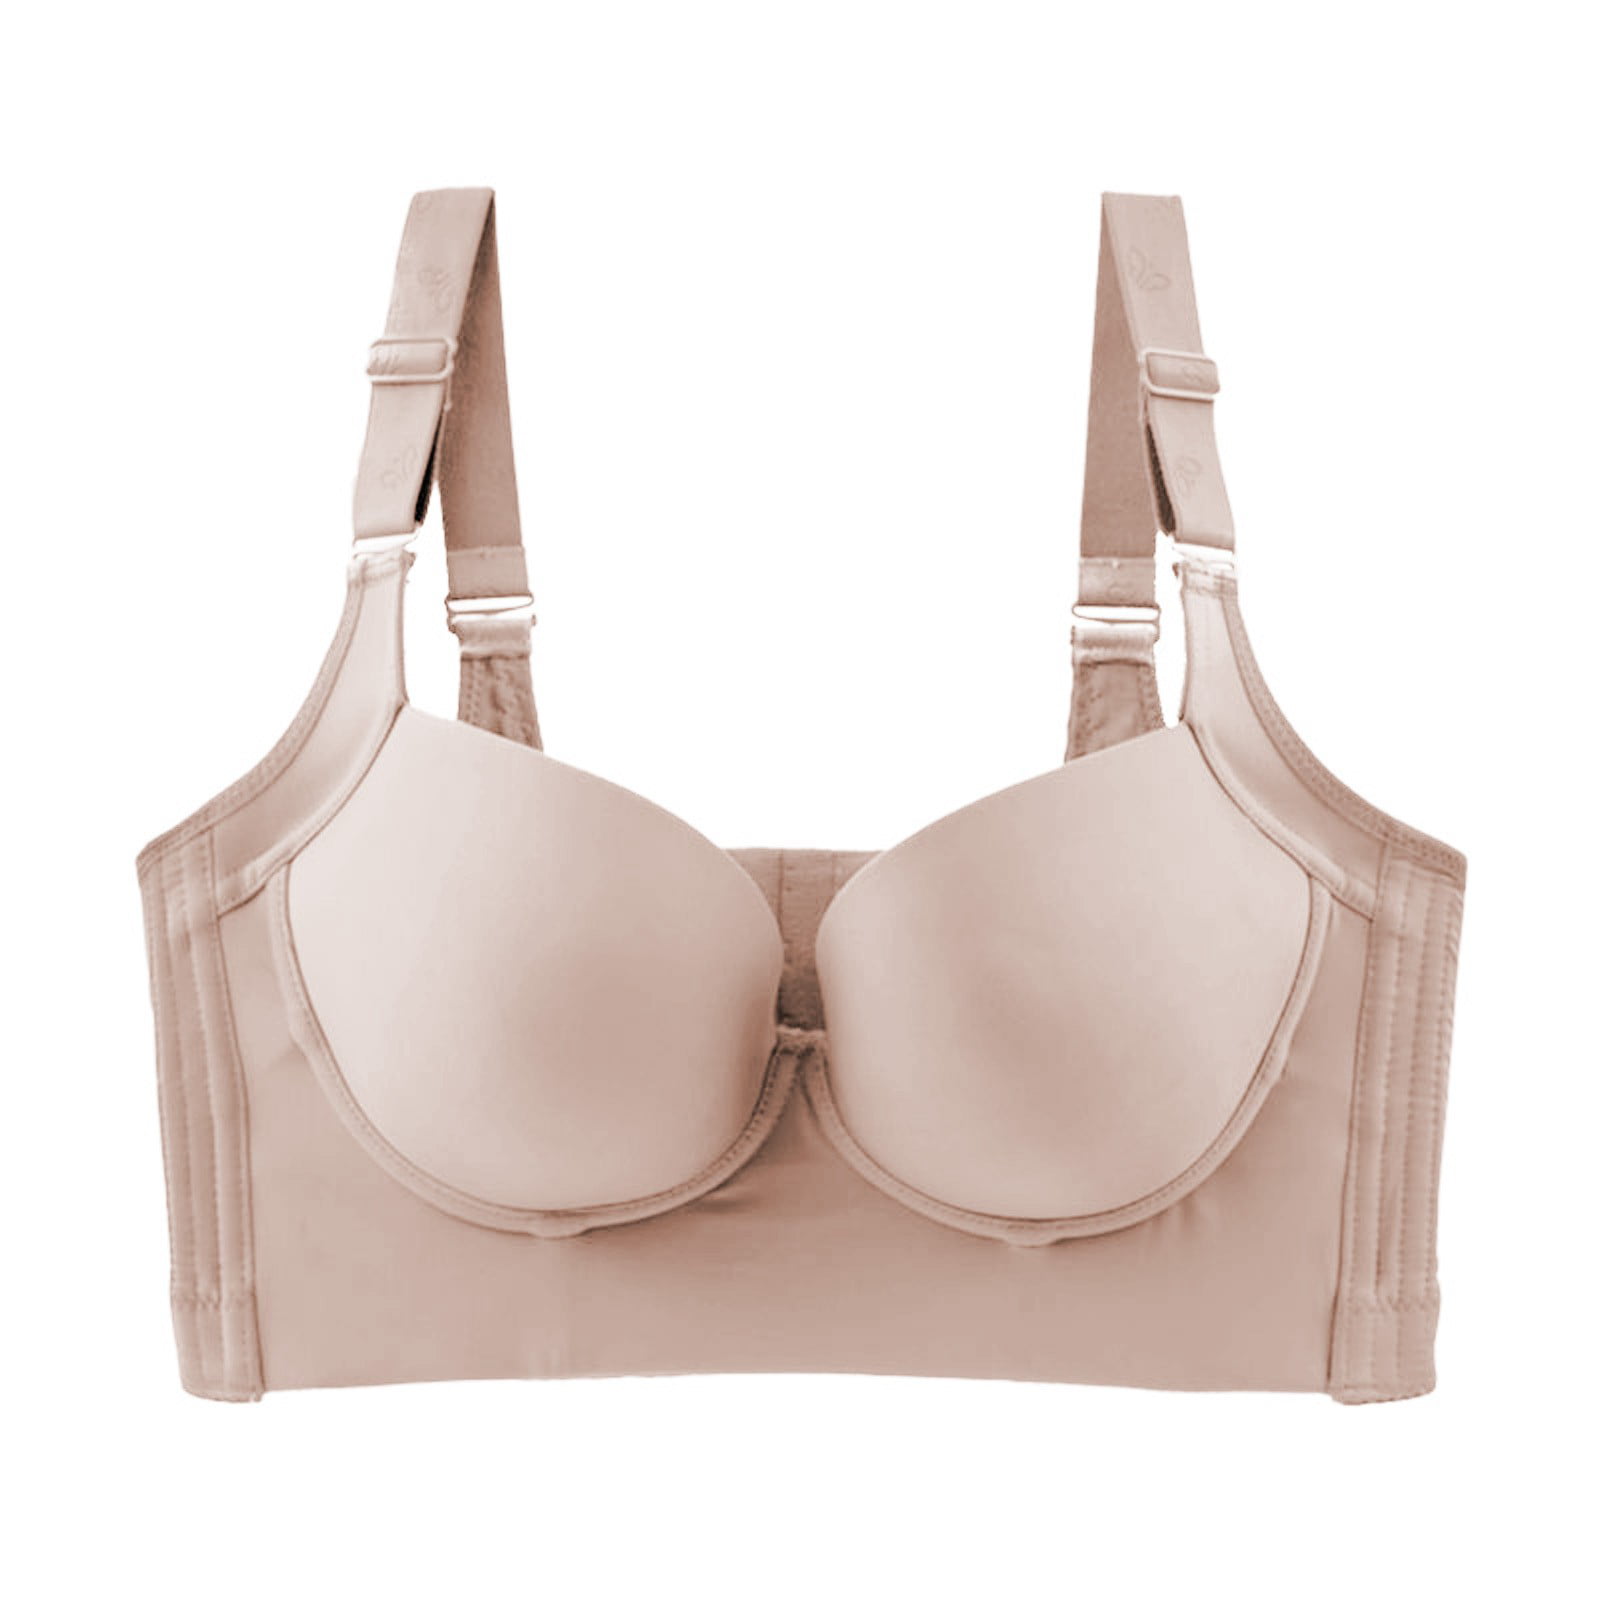 Padded bra in asymmetric breasts - Stock Image - C028/6683 - Science Photo  Library